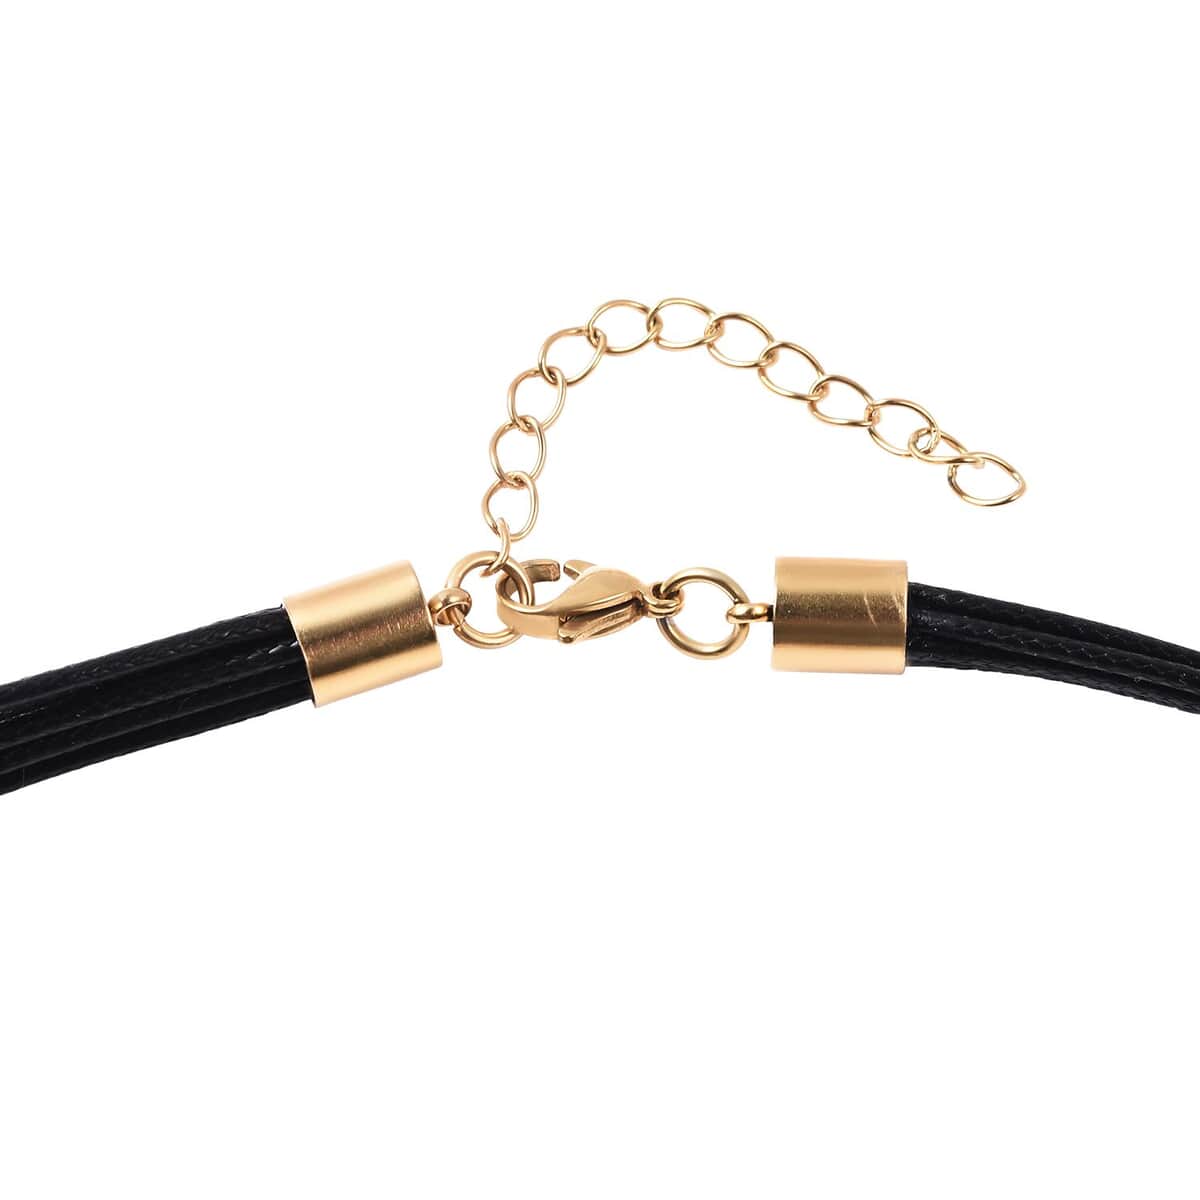 Black Faux Leather Cord Twist Bracelet (7-8.50In) and Necklace (16-18In) in ION Plated YG Stainless Steel image number 6